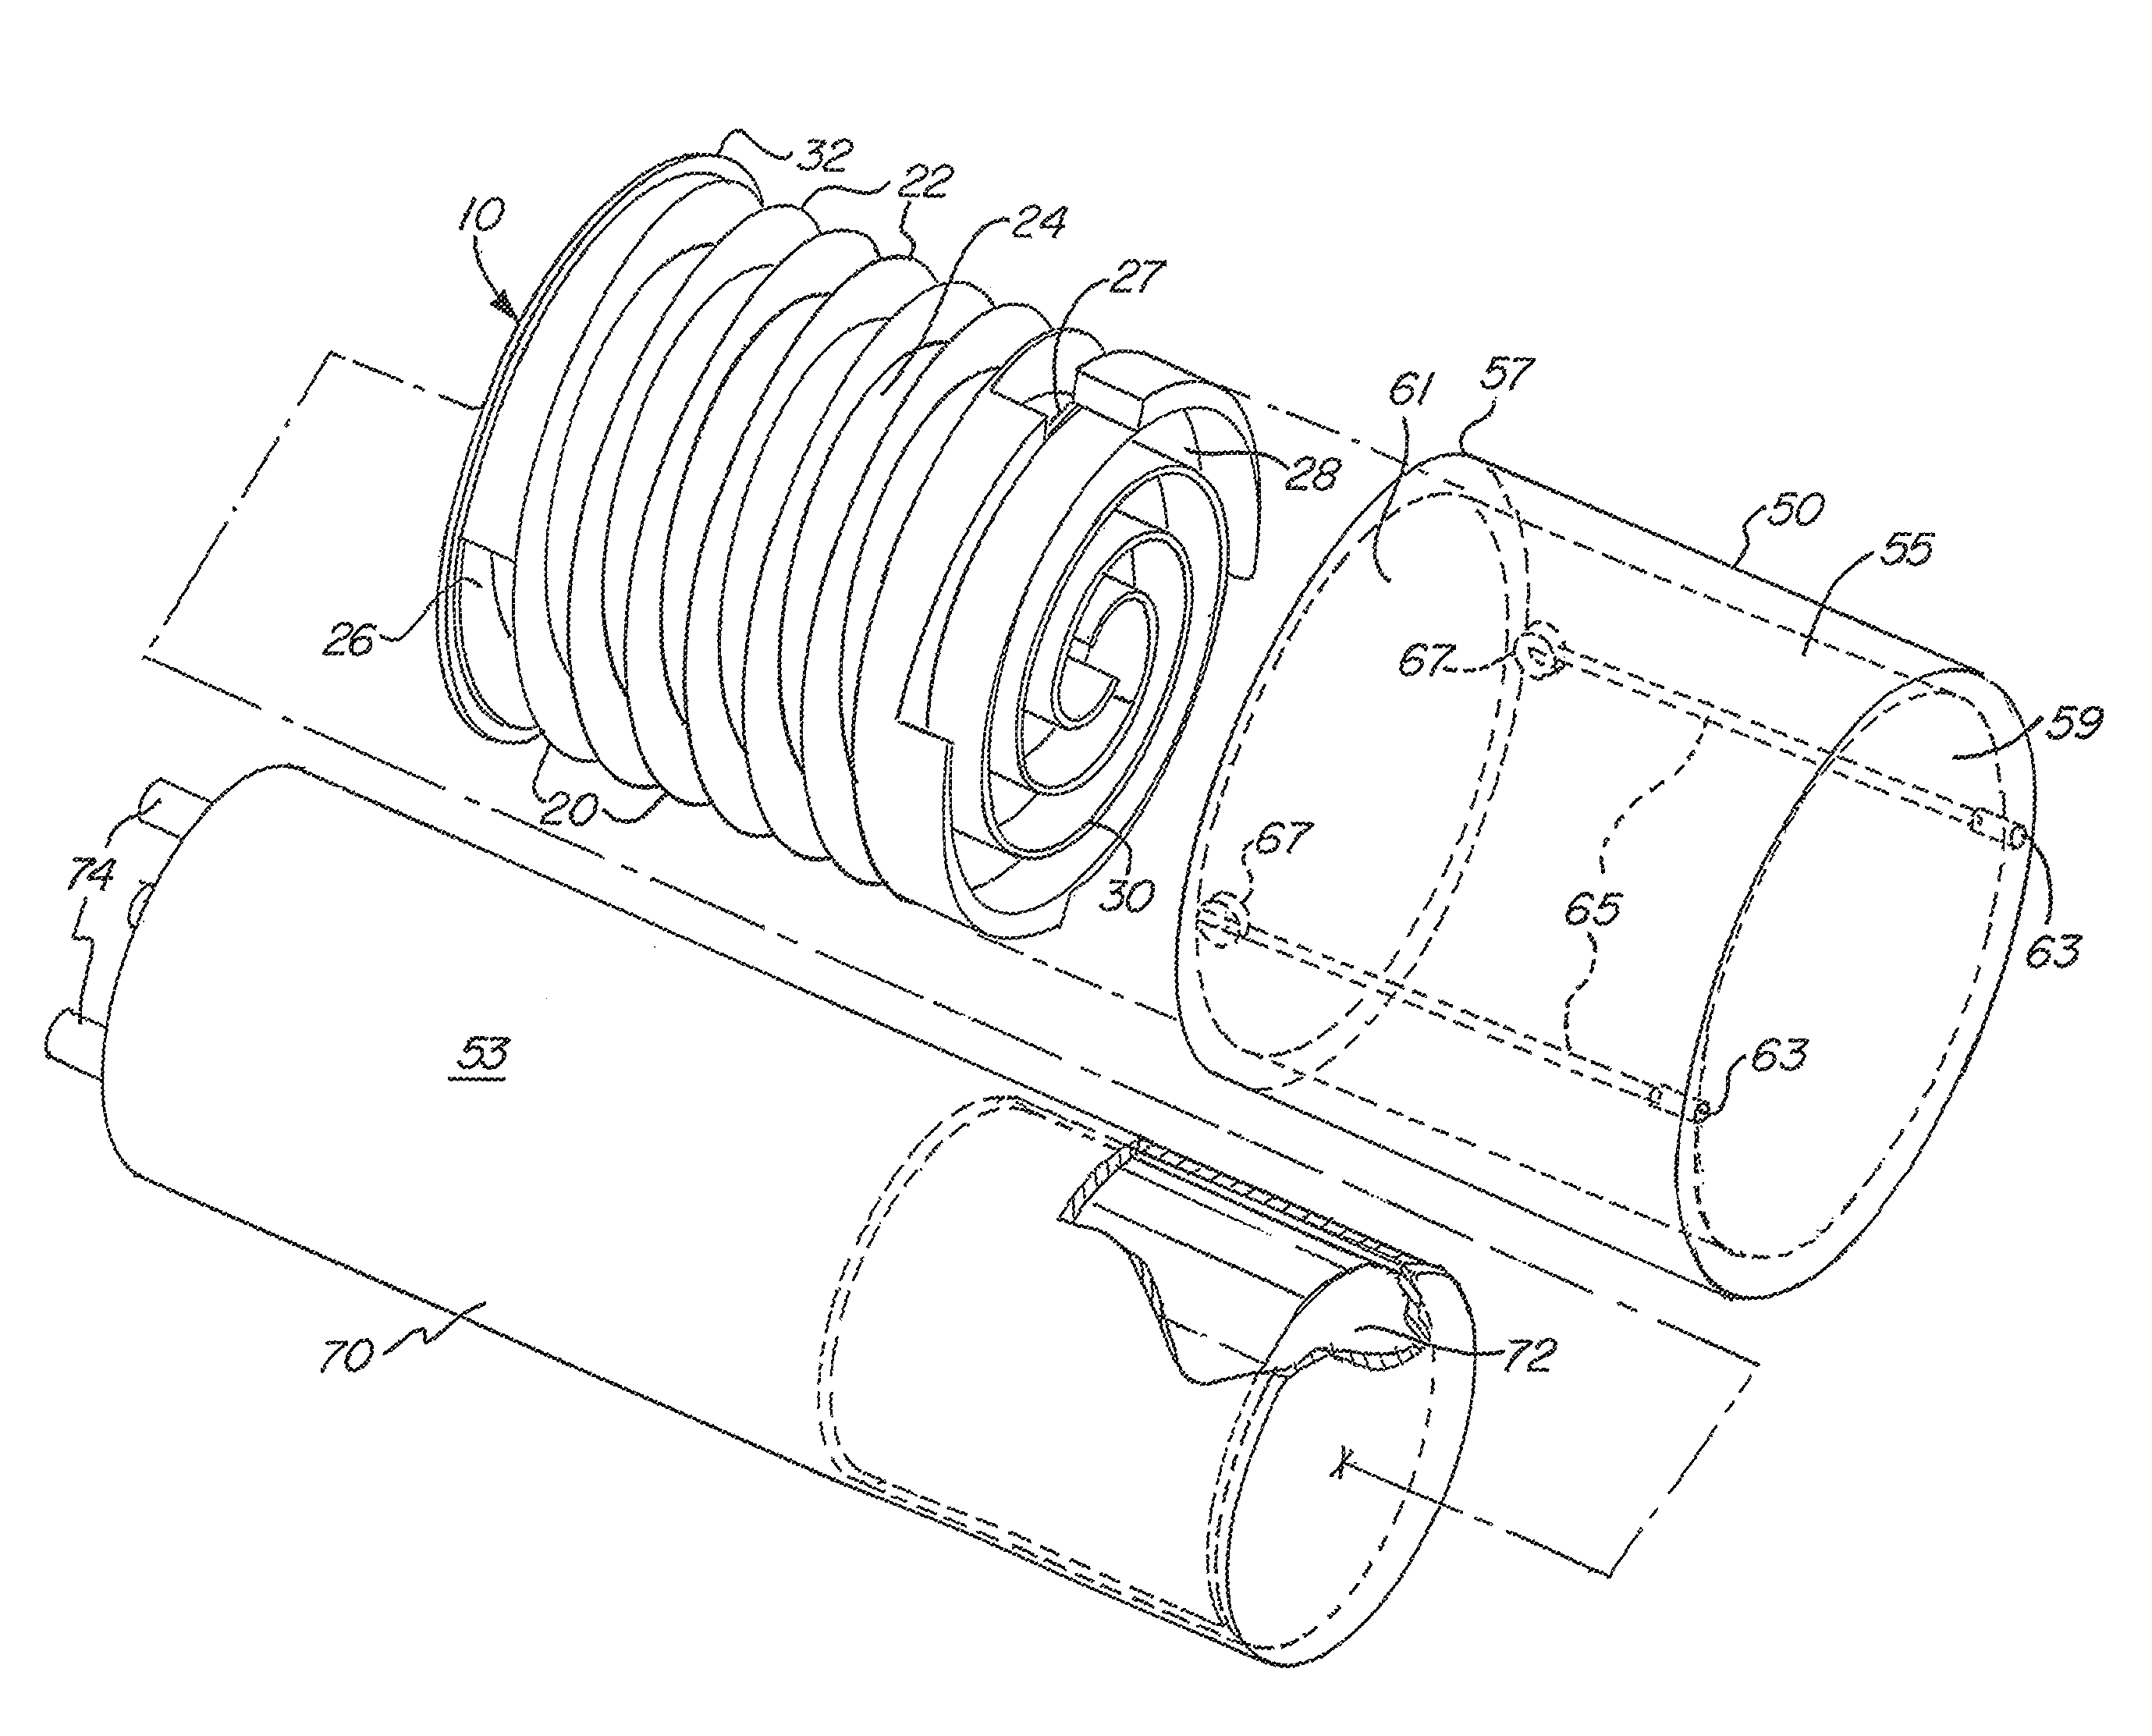 Flowthrough labyrinth device for use in detection of radiation in fluids and method of using same